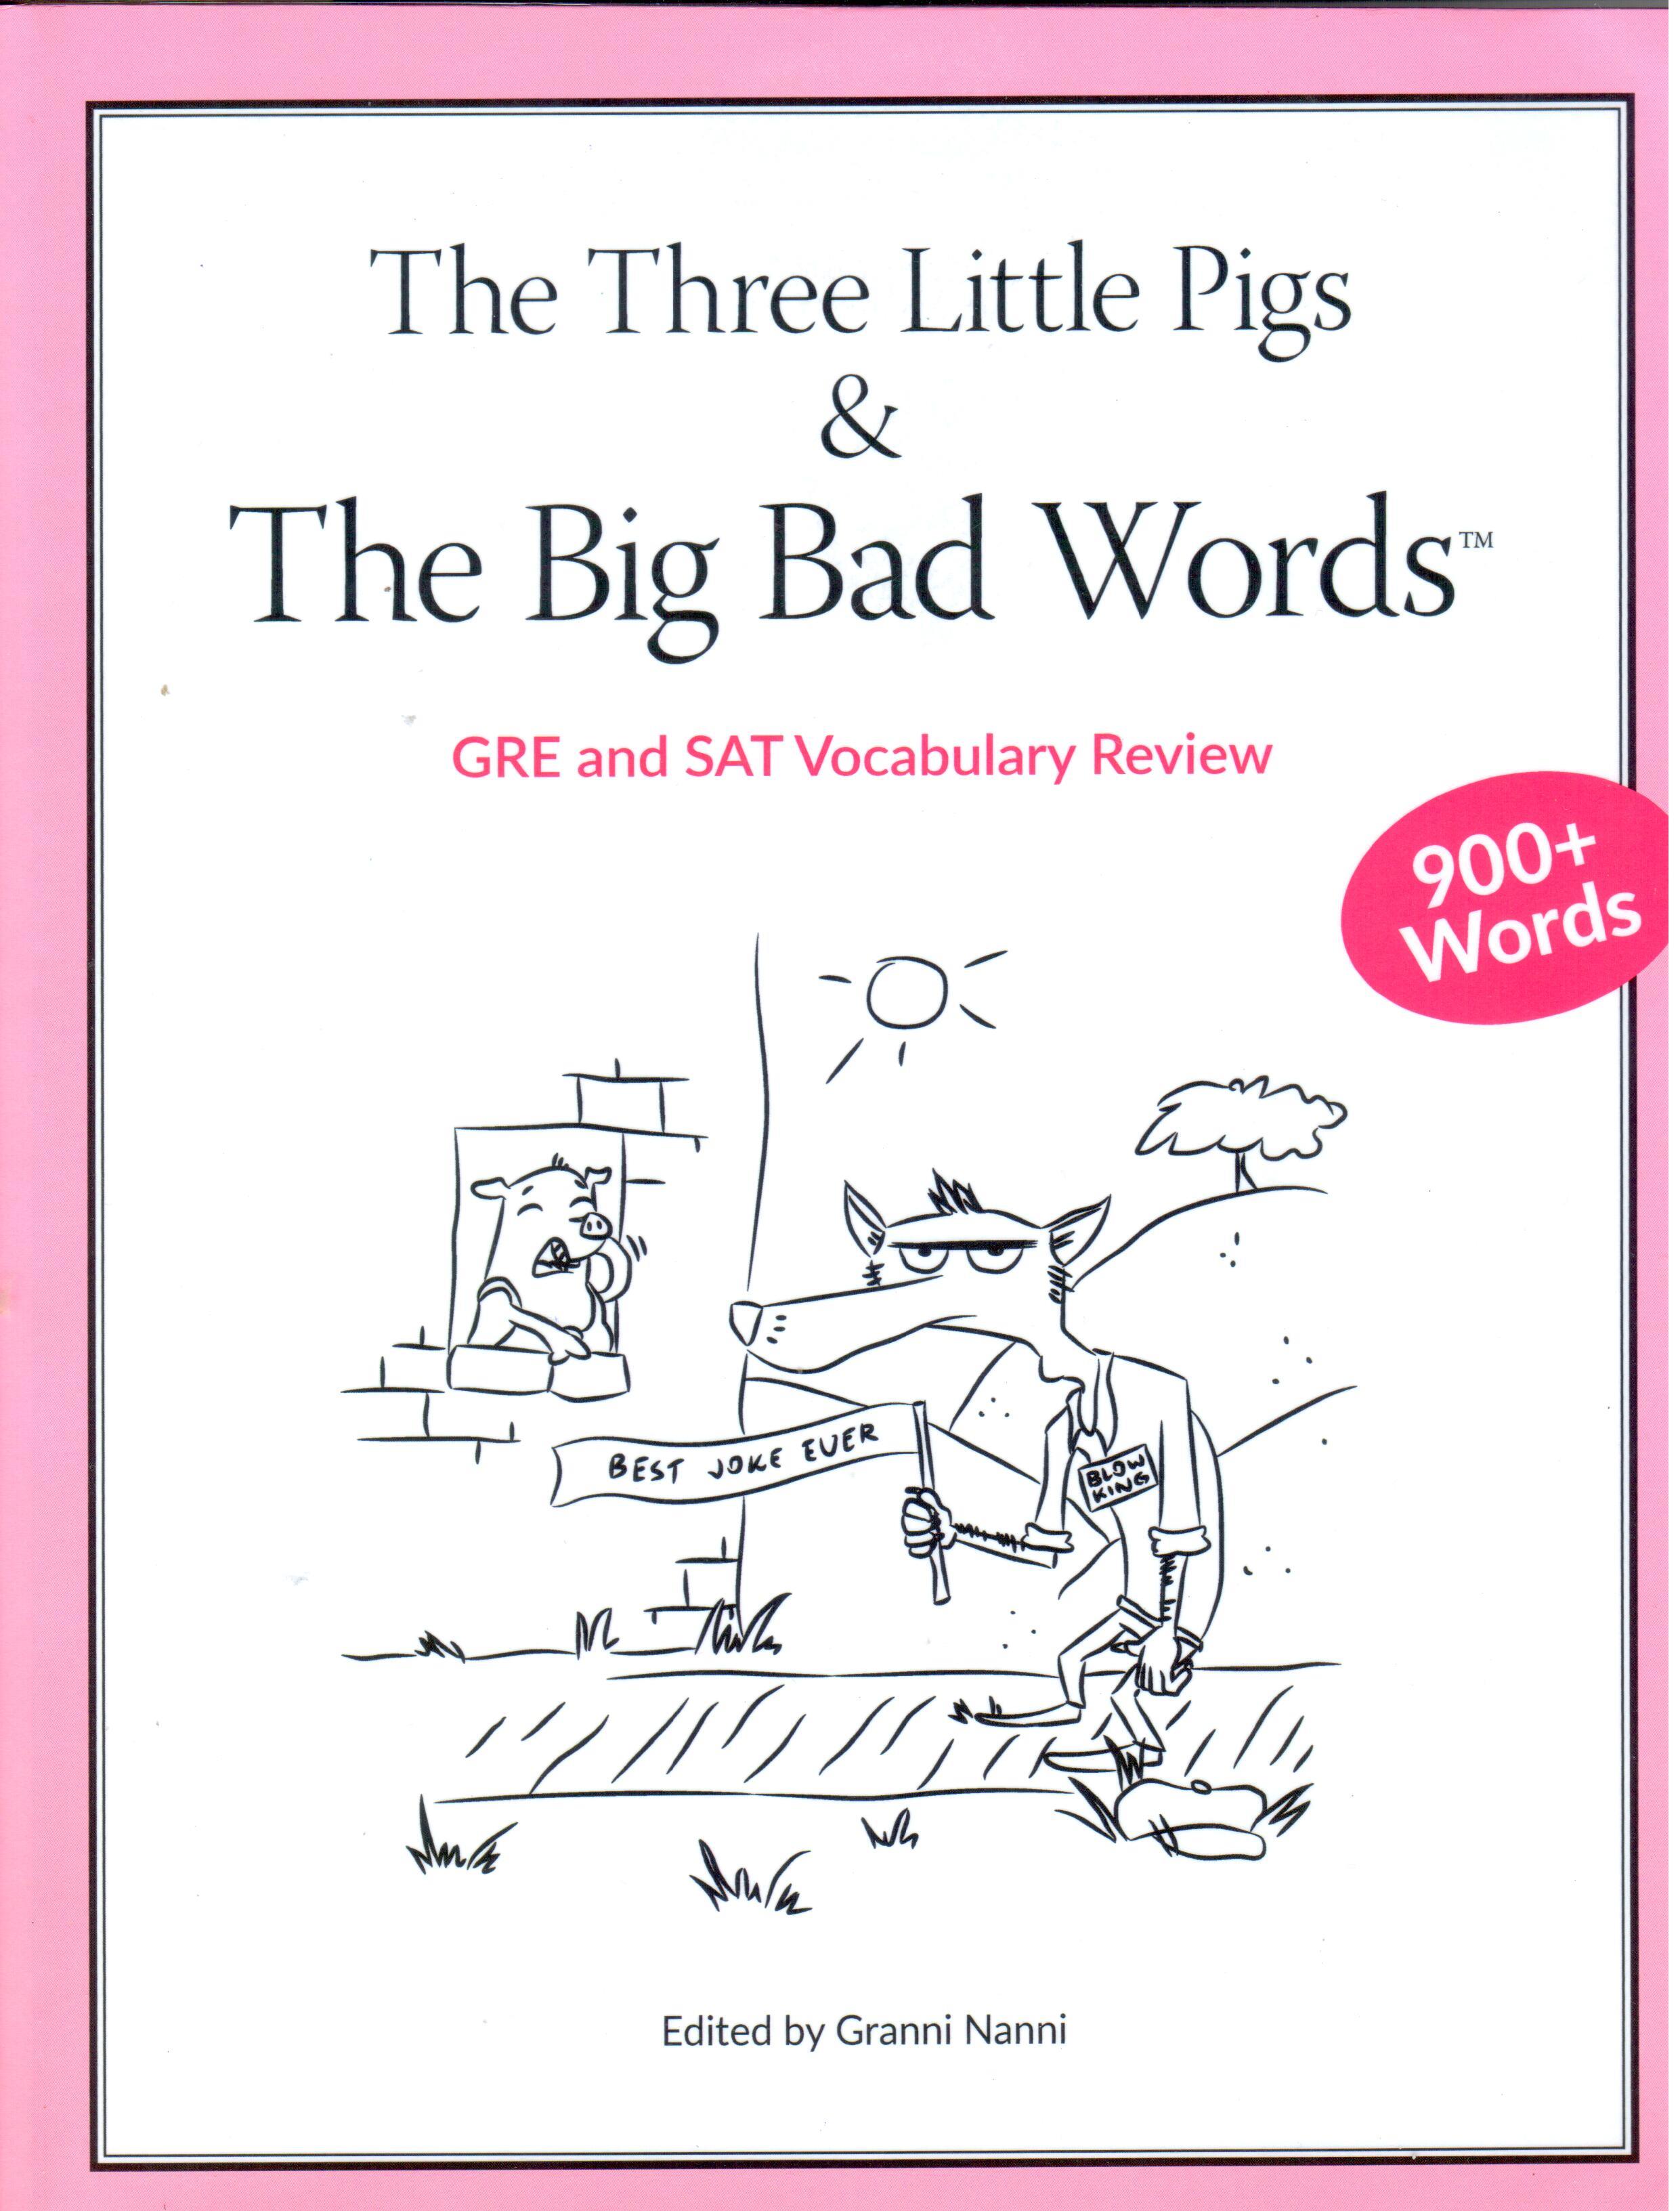 The Three Little Digs & The Big Bad Words: GRE and SAT Vocabulary Review